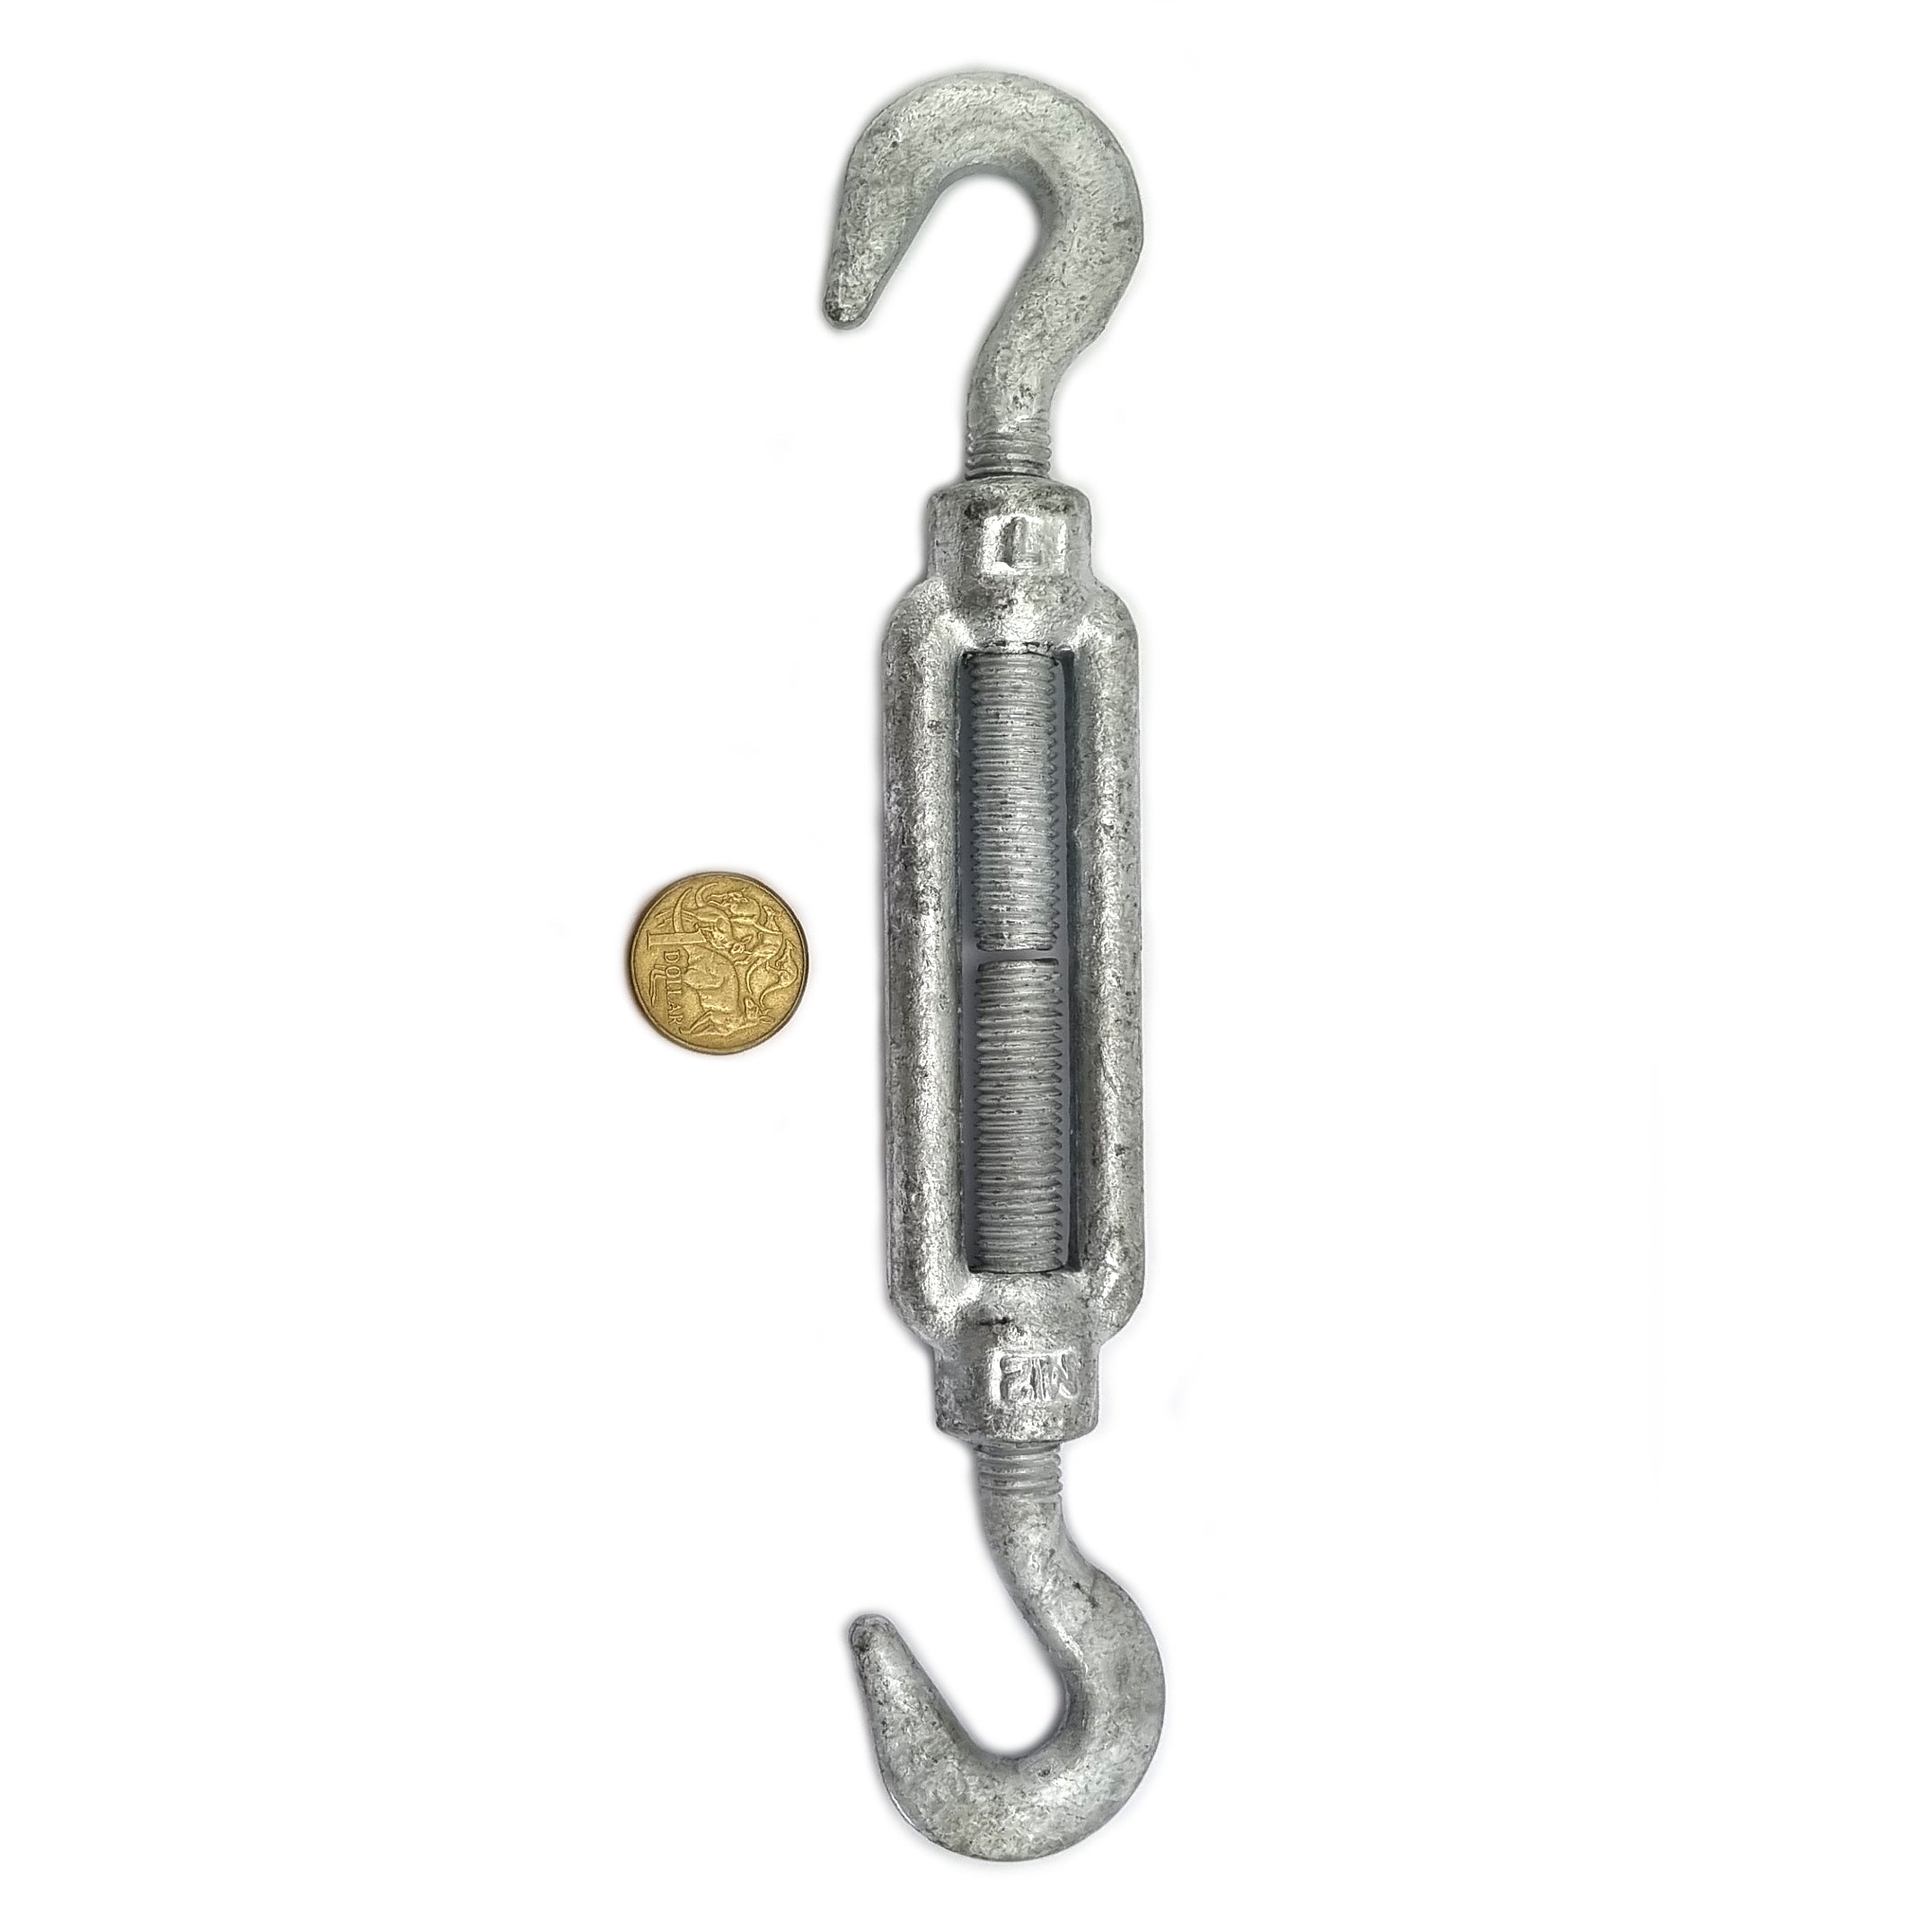 12mm Hook-hook turnbuckle in a galvanised finish. Shop hardware online chain.com.au